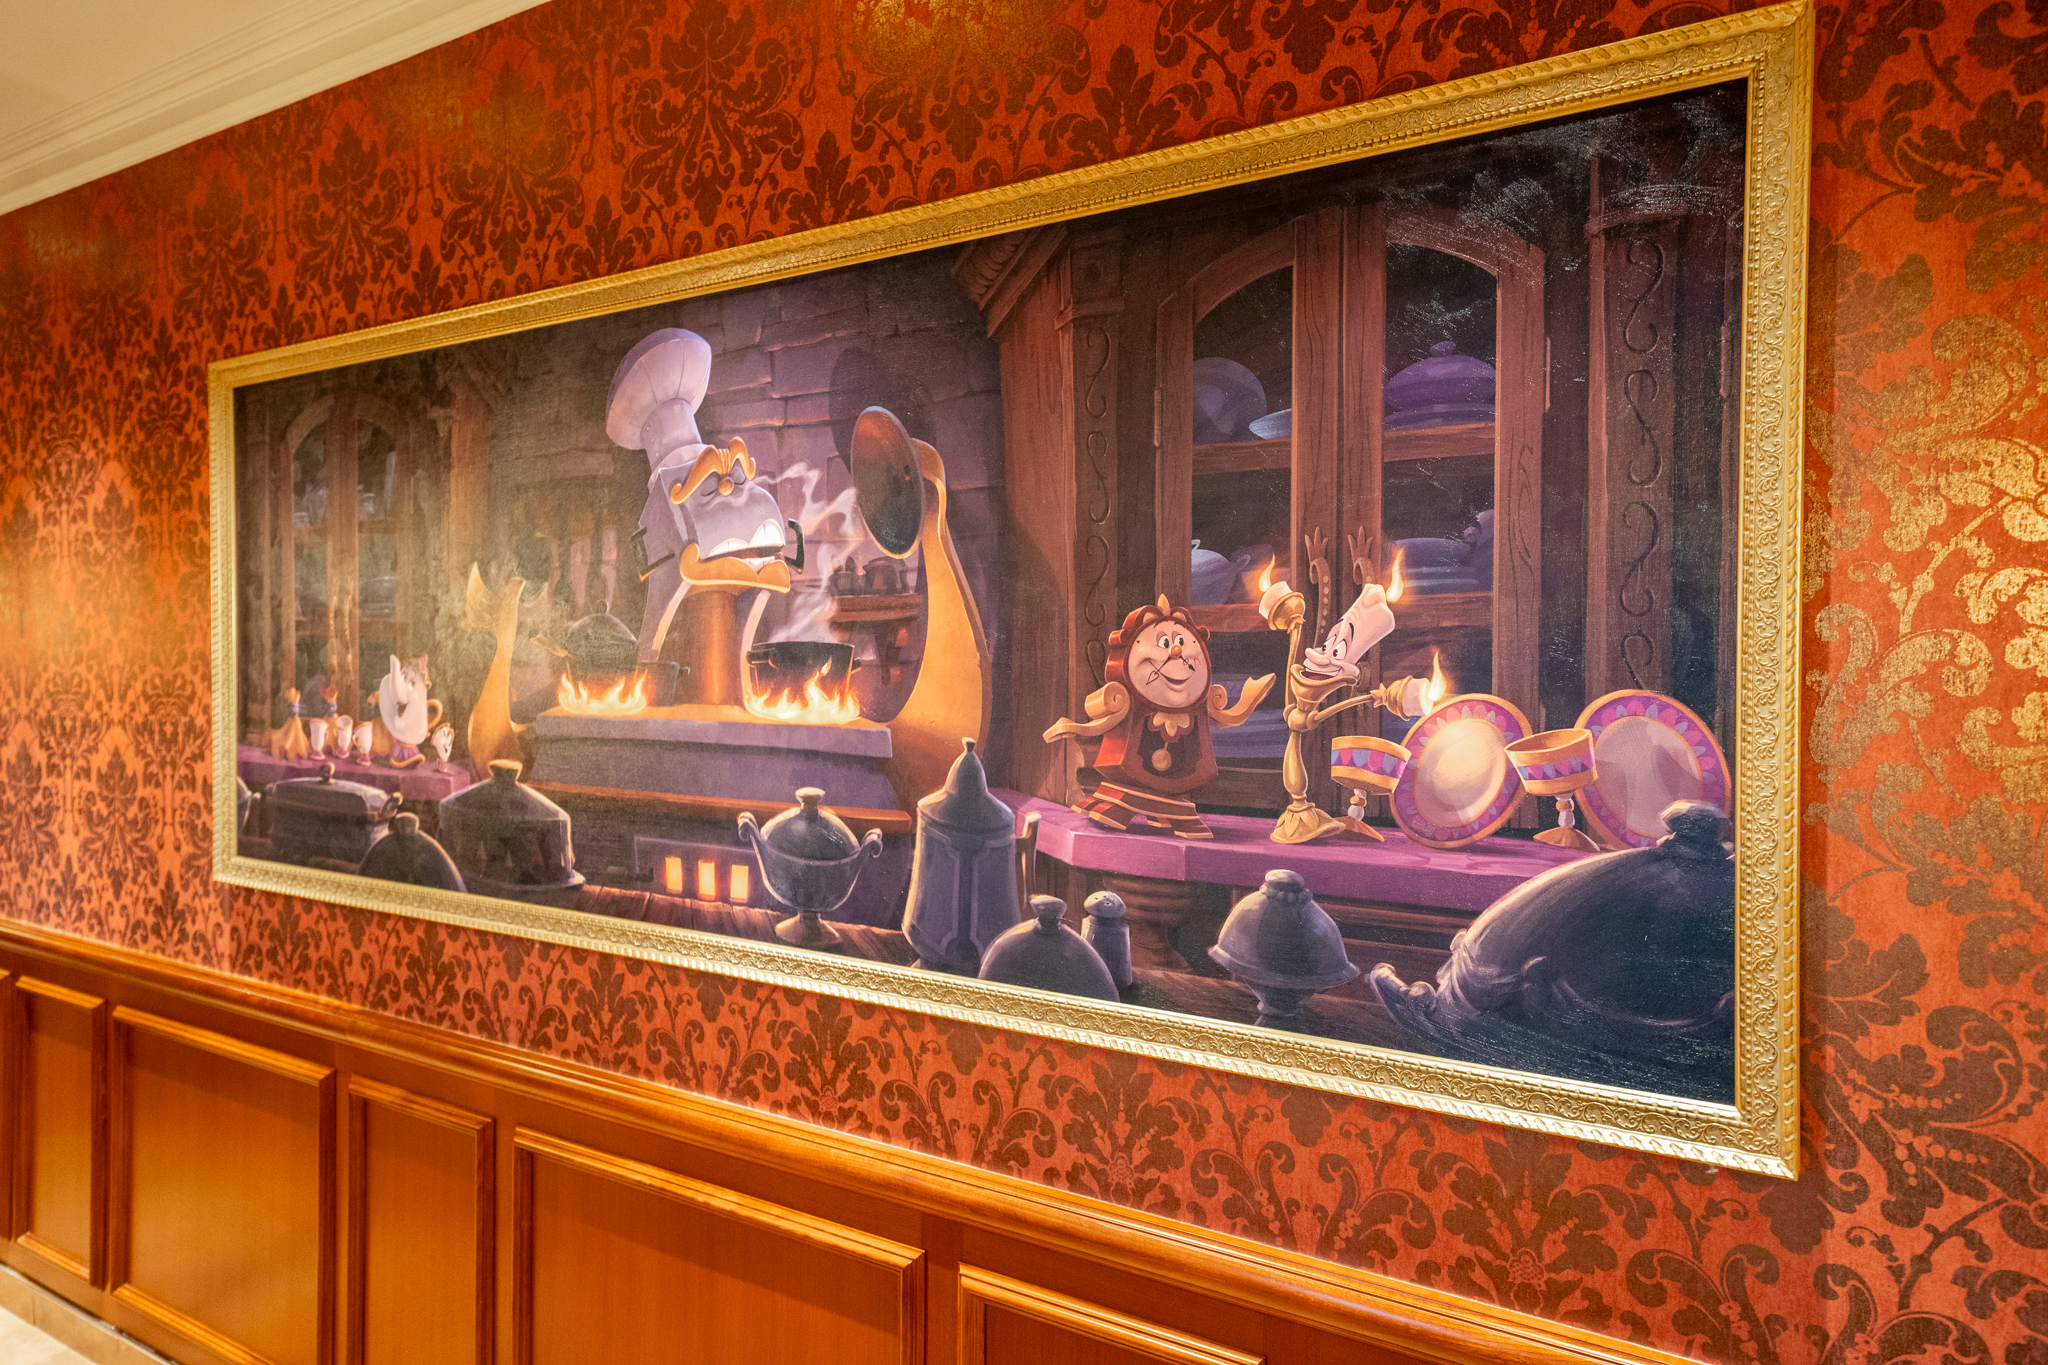 Exclusive Look: New Artwork Revealed for Royal Banquet at Disneyland Hotel in Paris